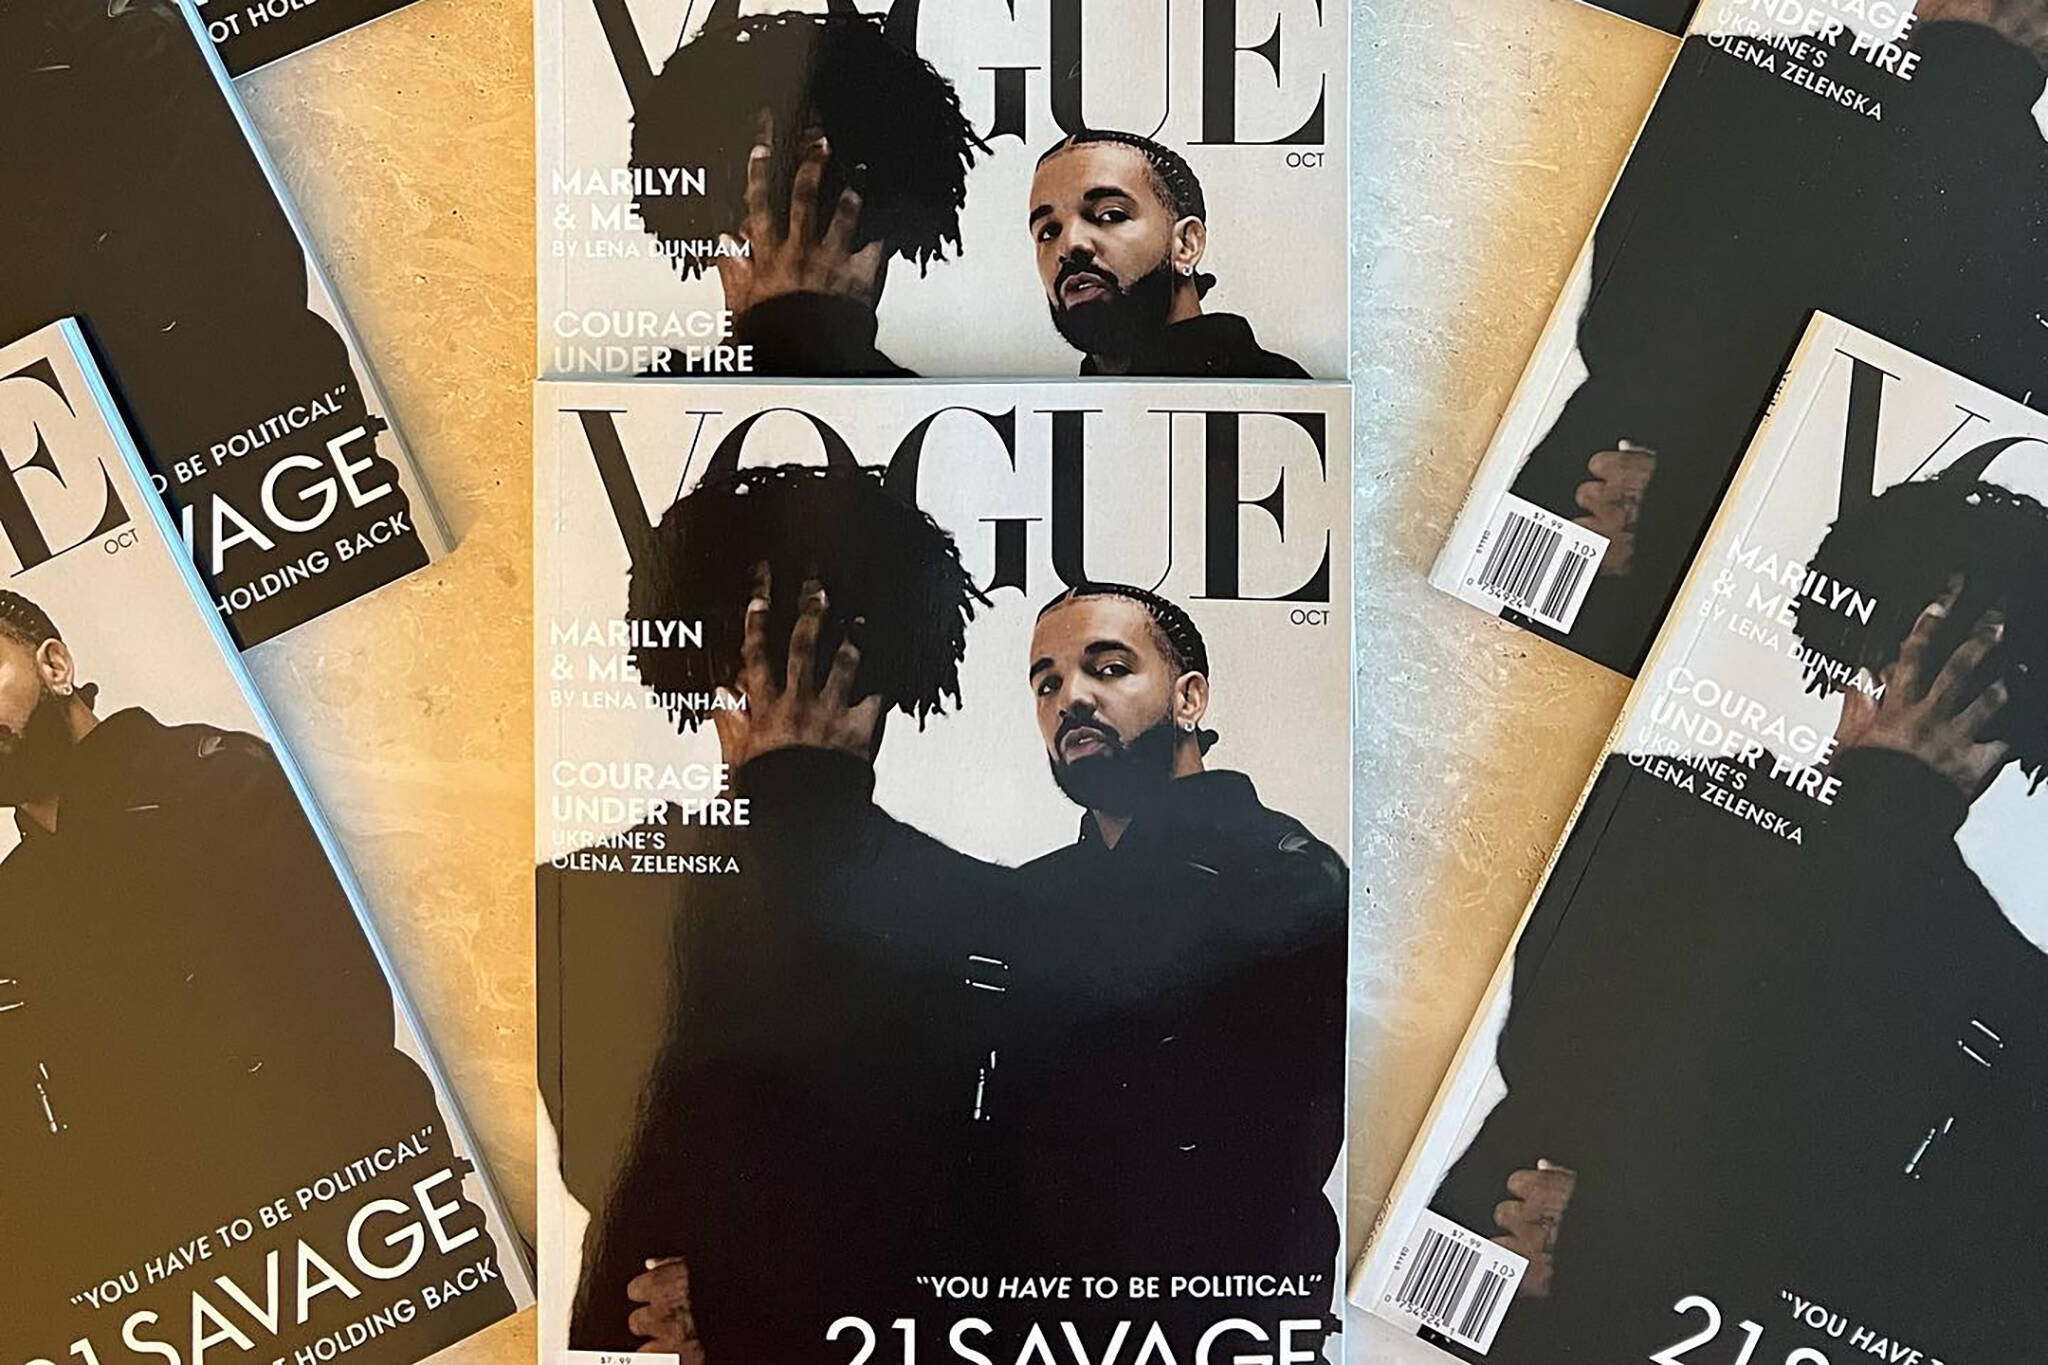 Drake And 21 Savage Land In Legal Trouble For Using 'Vogue' Name To Promote  Album 'Her Loss'-REPORTS